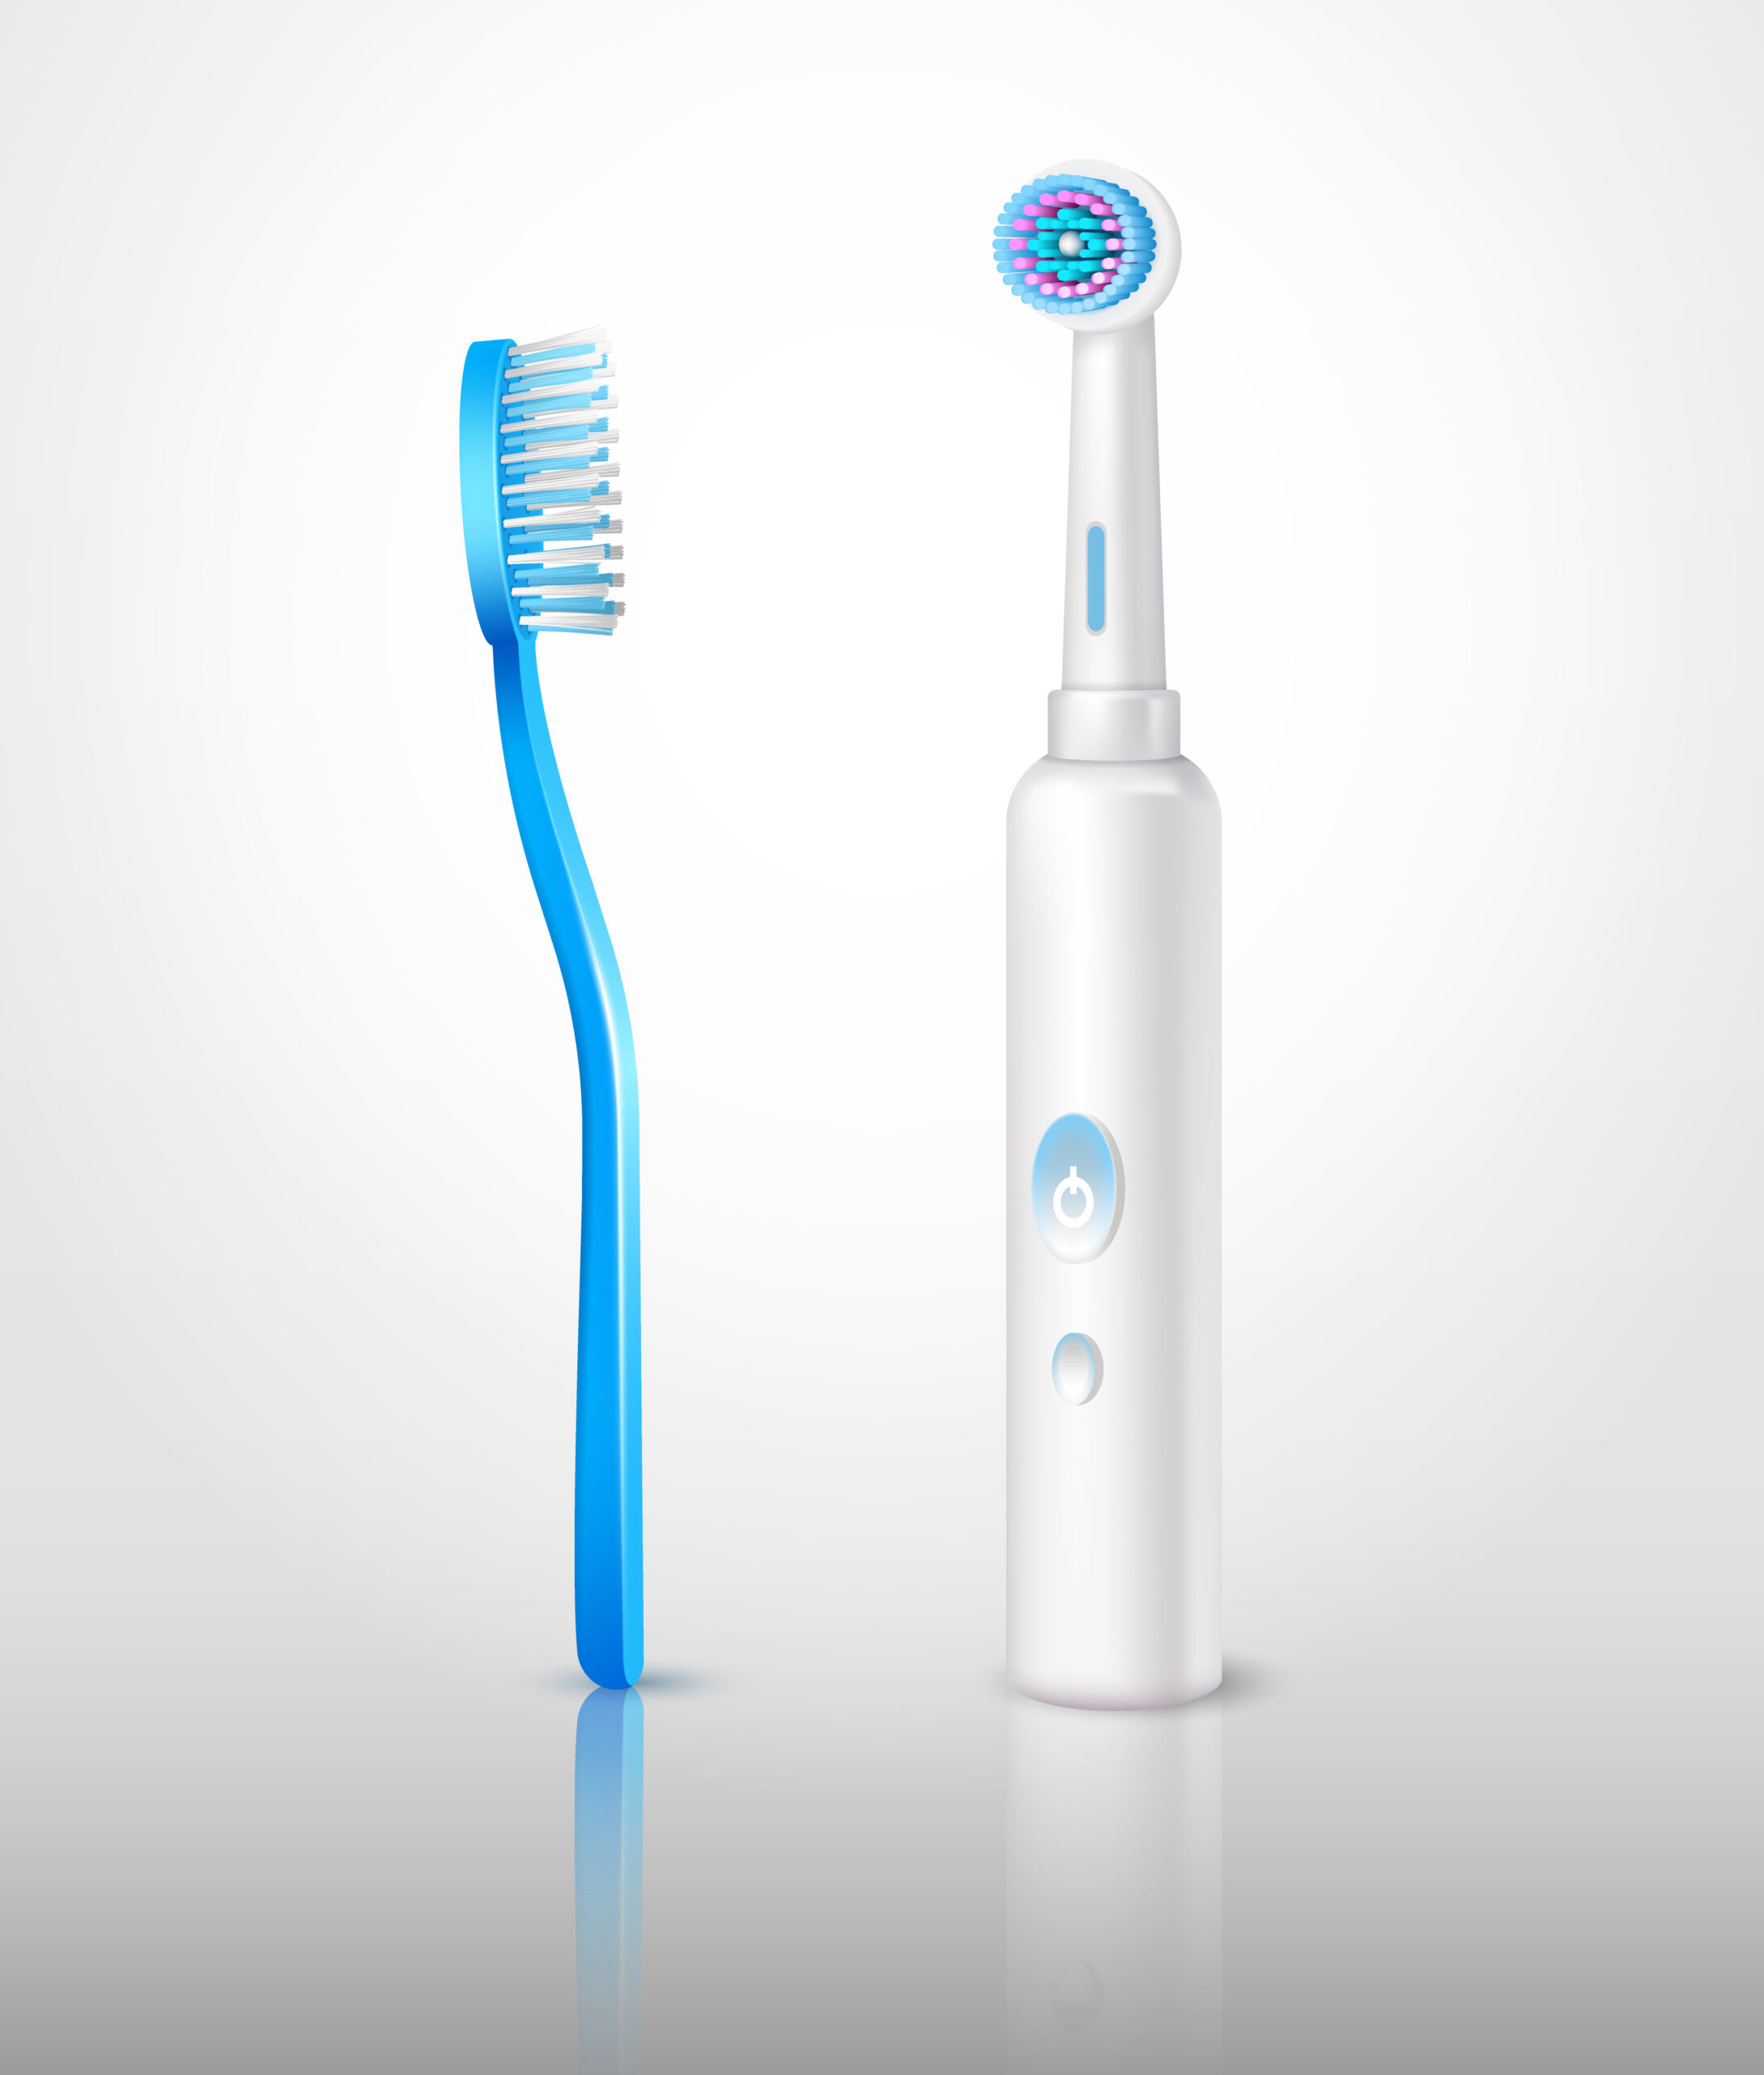 manual toothbrush and electric toothbrush